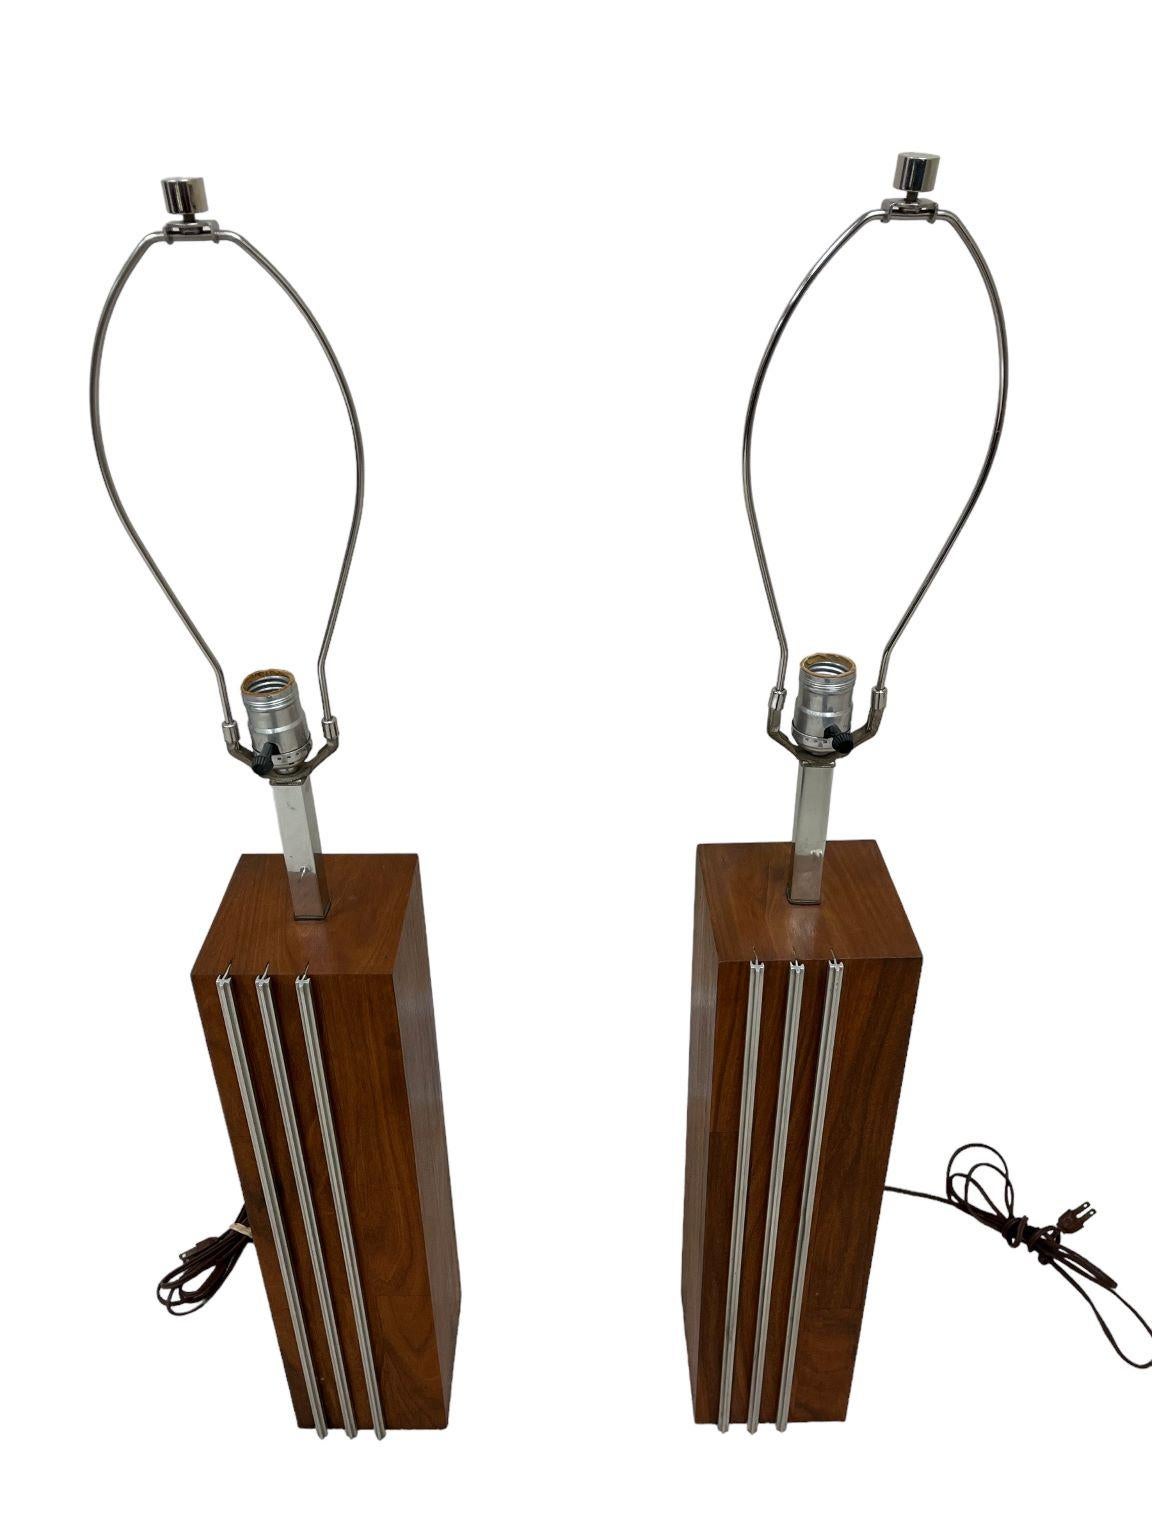 Pair of Chrome And Walnut Mid Century Lamps By Laurel Lamp Co.     In Good Condition For Sale In Bernville, PA